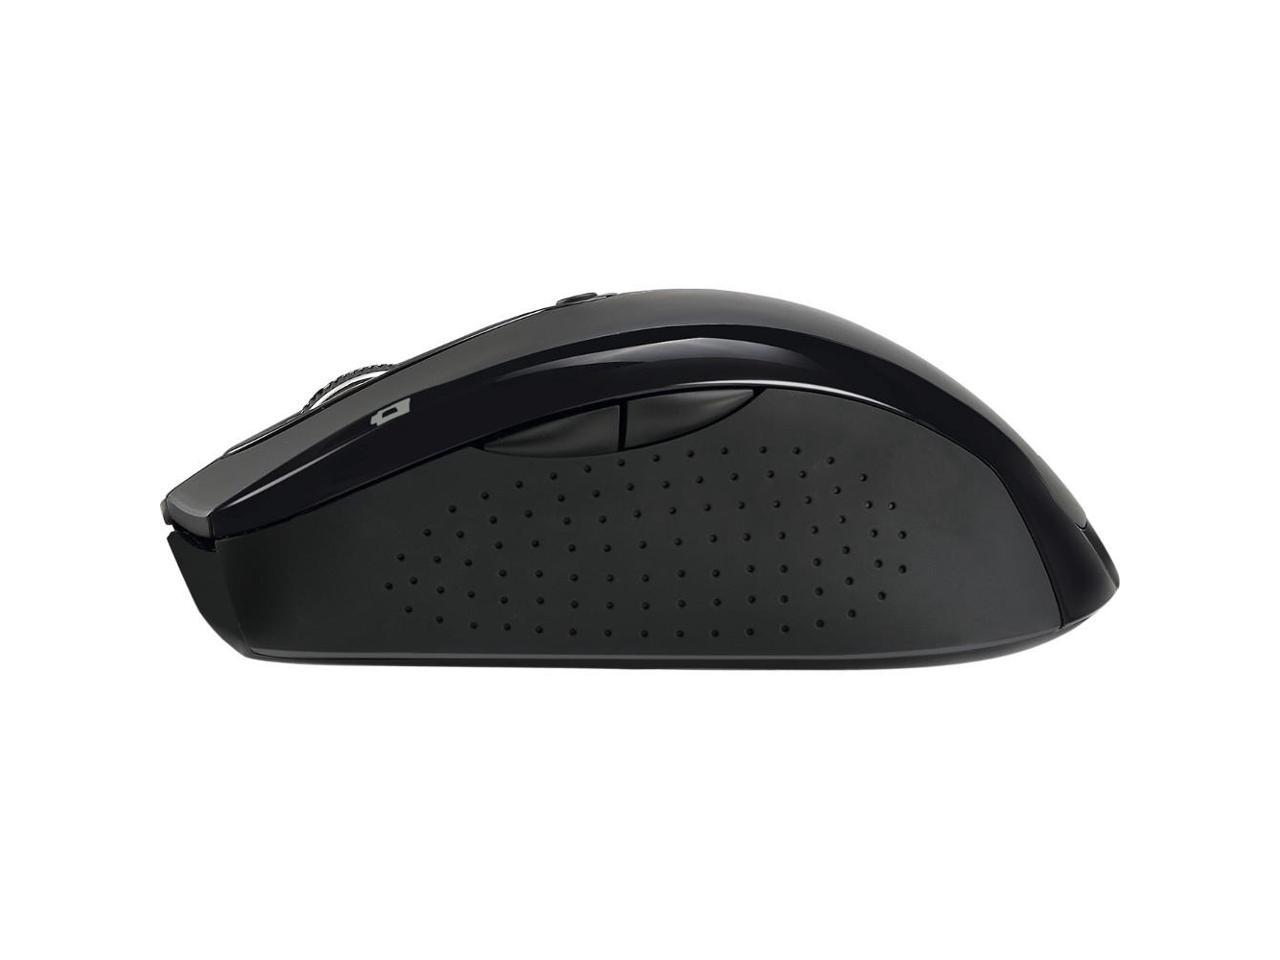 Adesso iMouse M20B - Wireless Ergonomic Optical Mouse - Optical - Wireless - Radio Frequency - Black - USB - 1600 dpi - Scroll Wheel - Right-handed Only